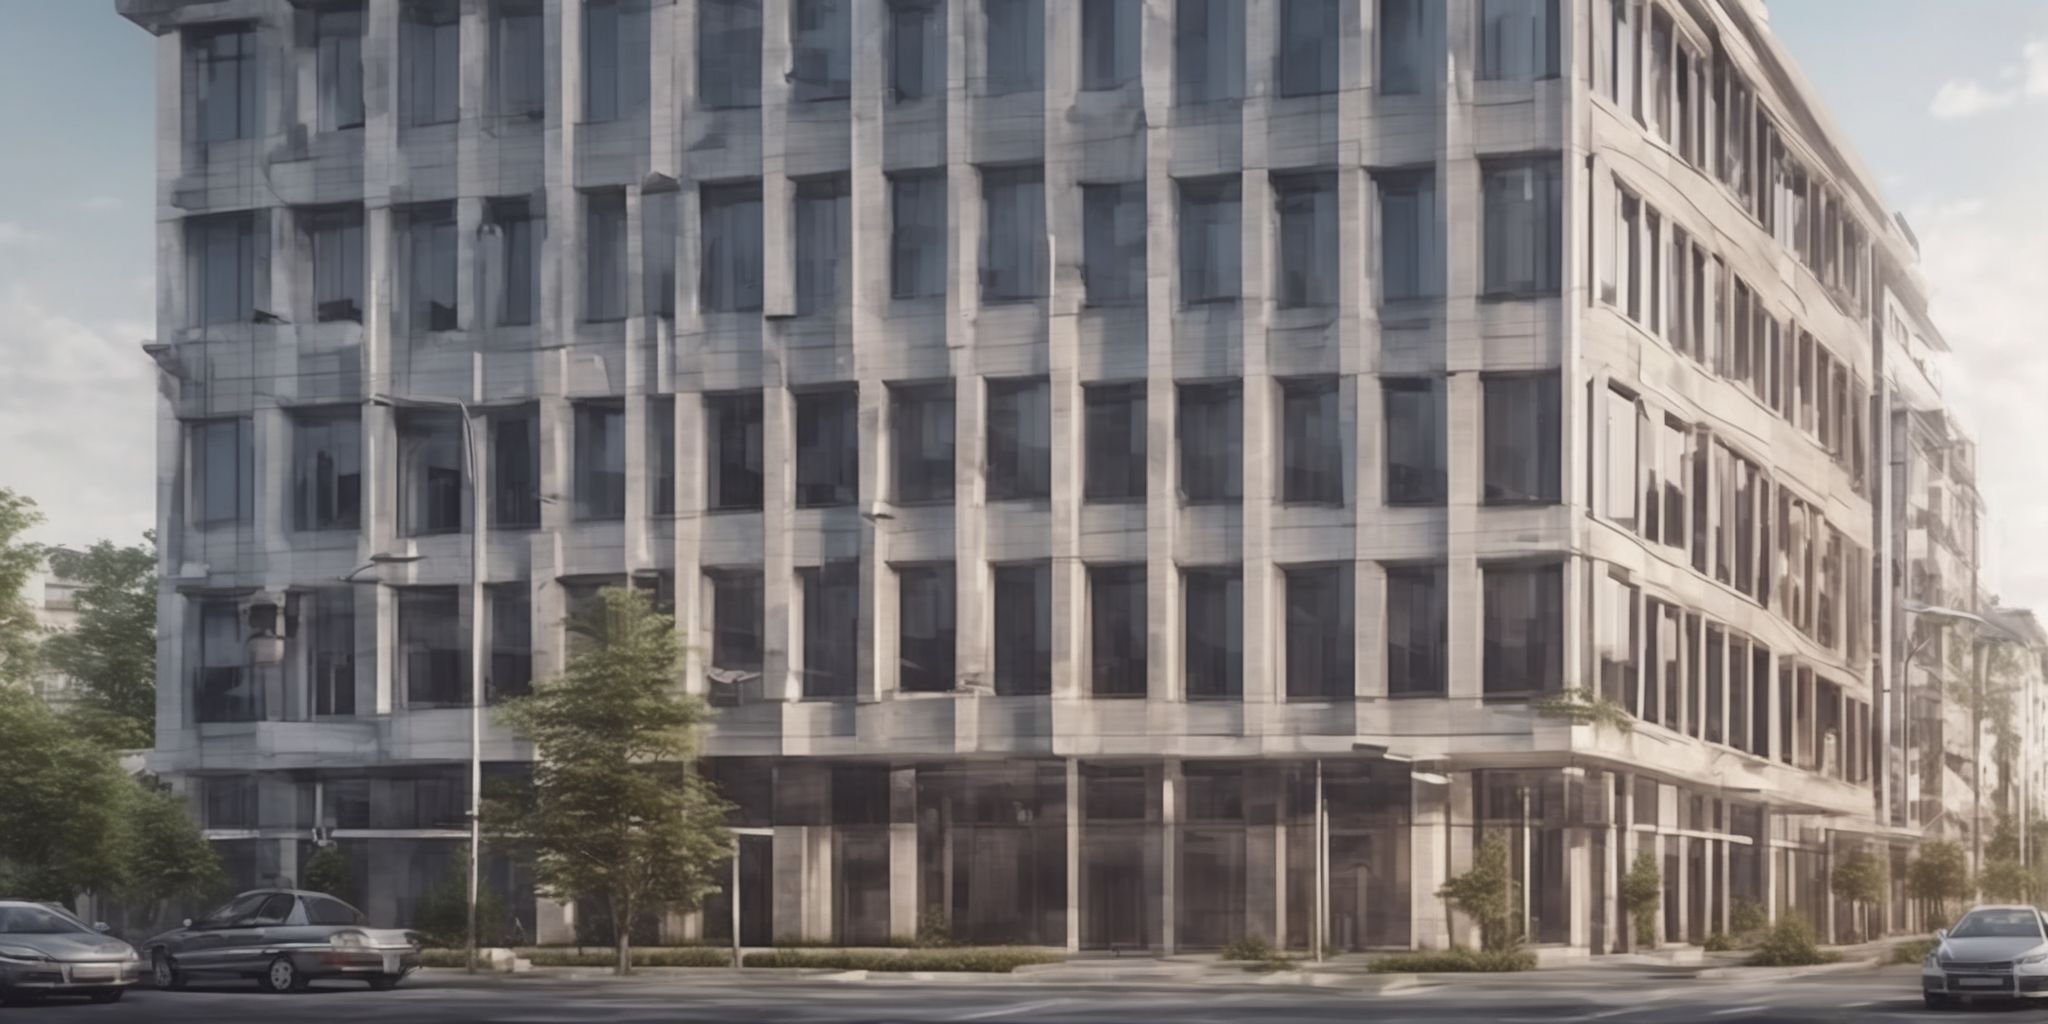 Office building  in realistic, photographic style